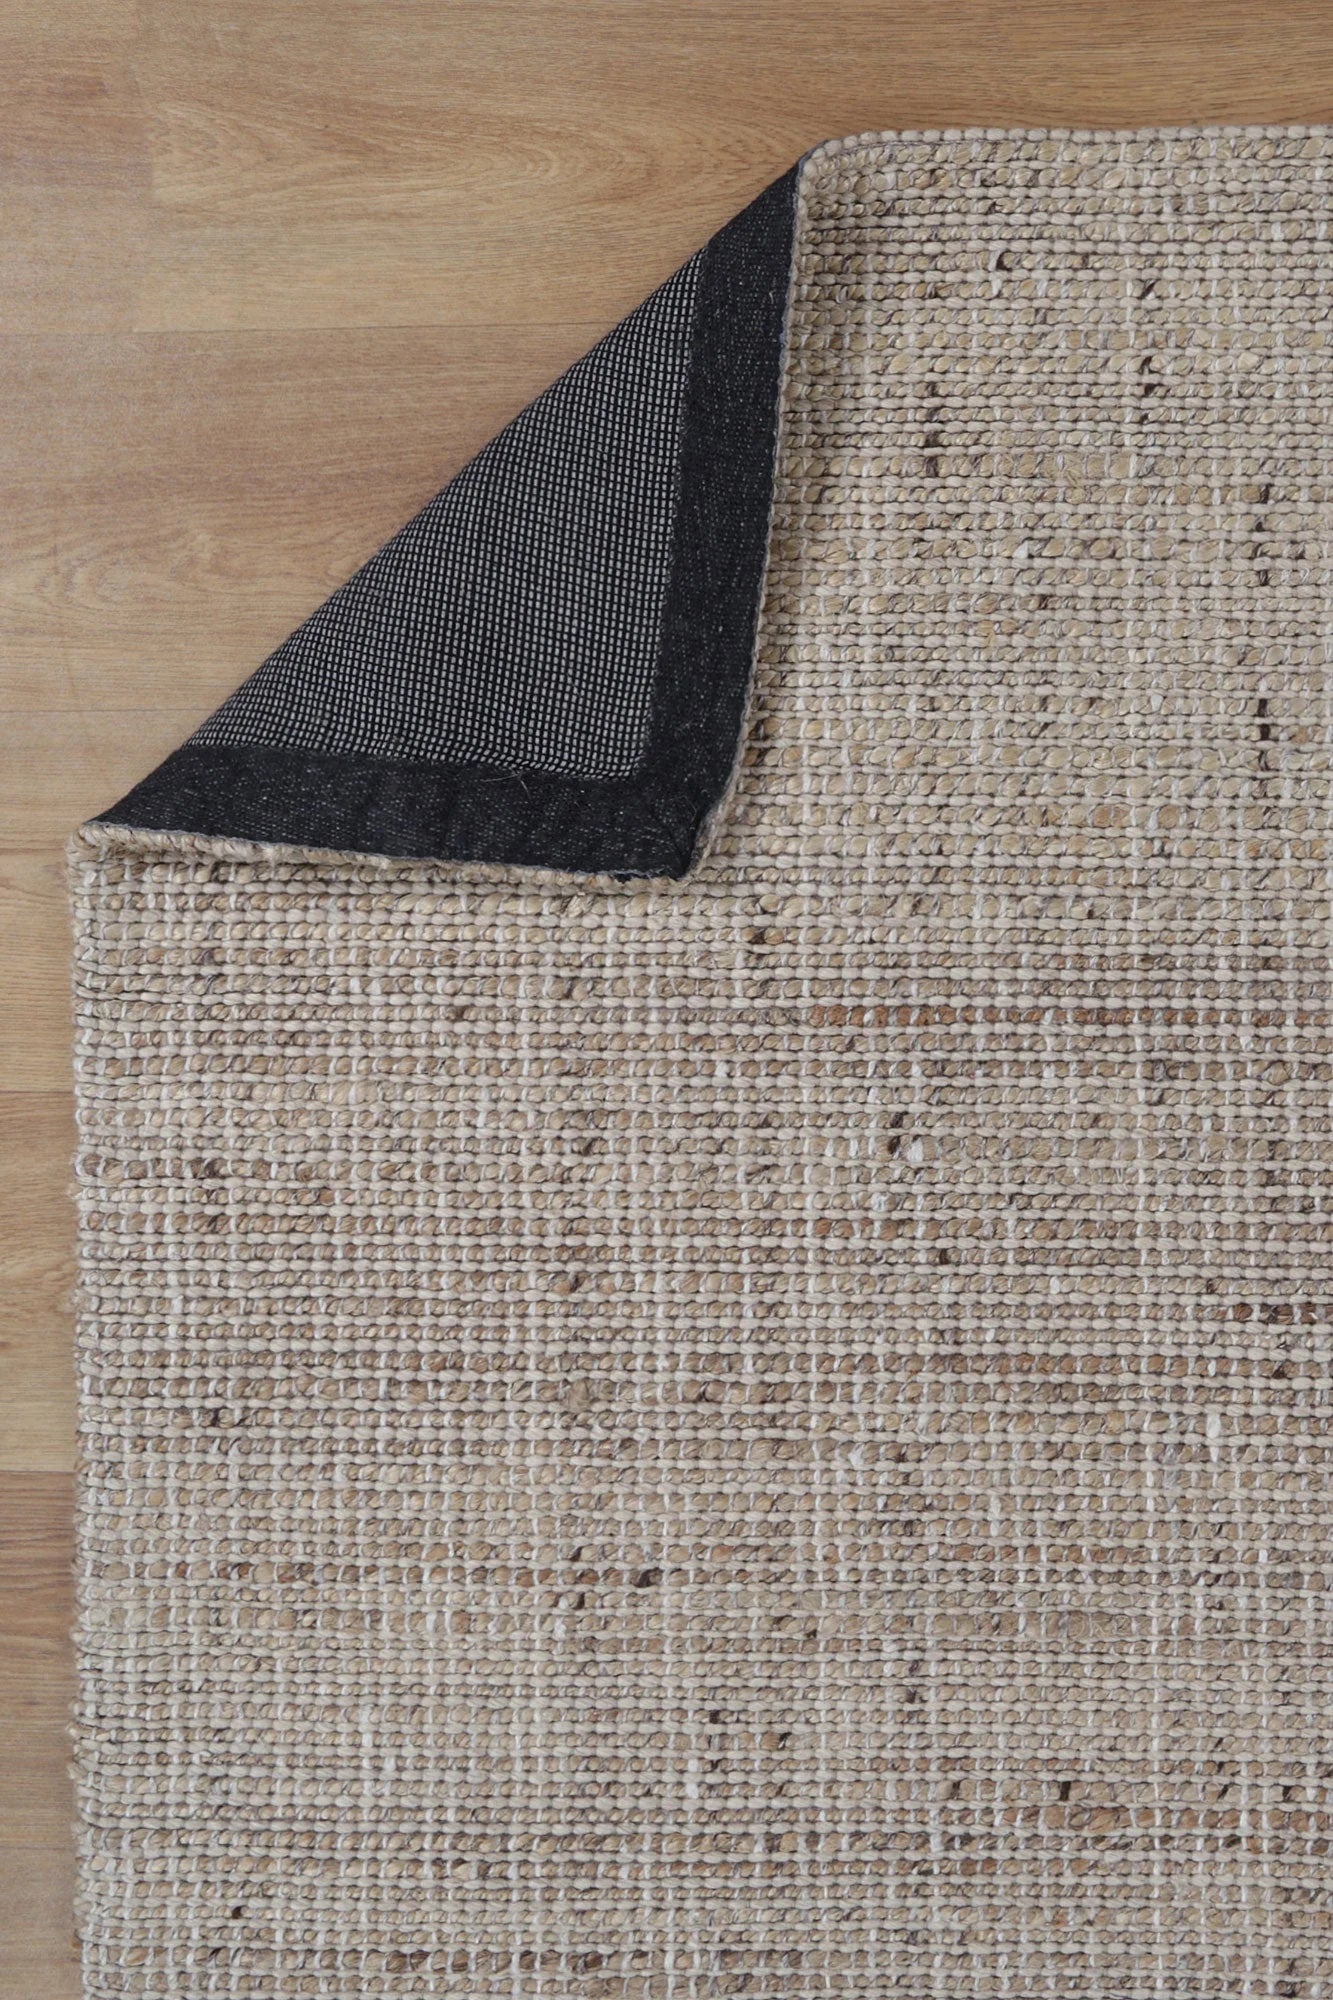 Image of the Dune Jute & Wool Rug folded to display both the top and bottom sides, showcasing the consistent quality and finish across its entire design.